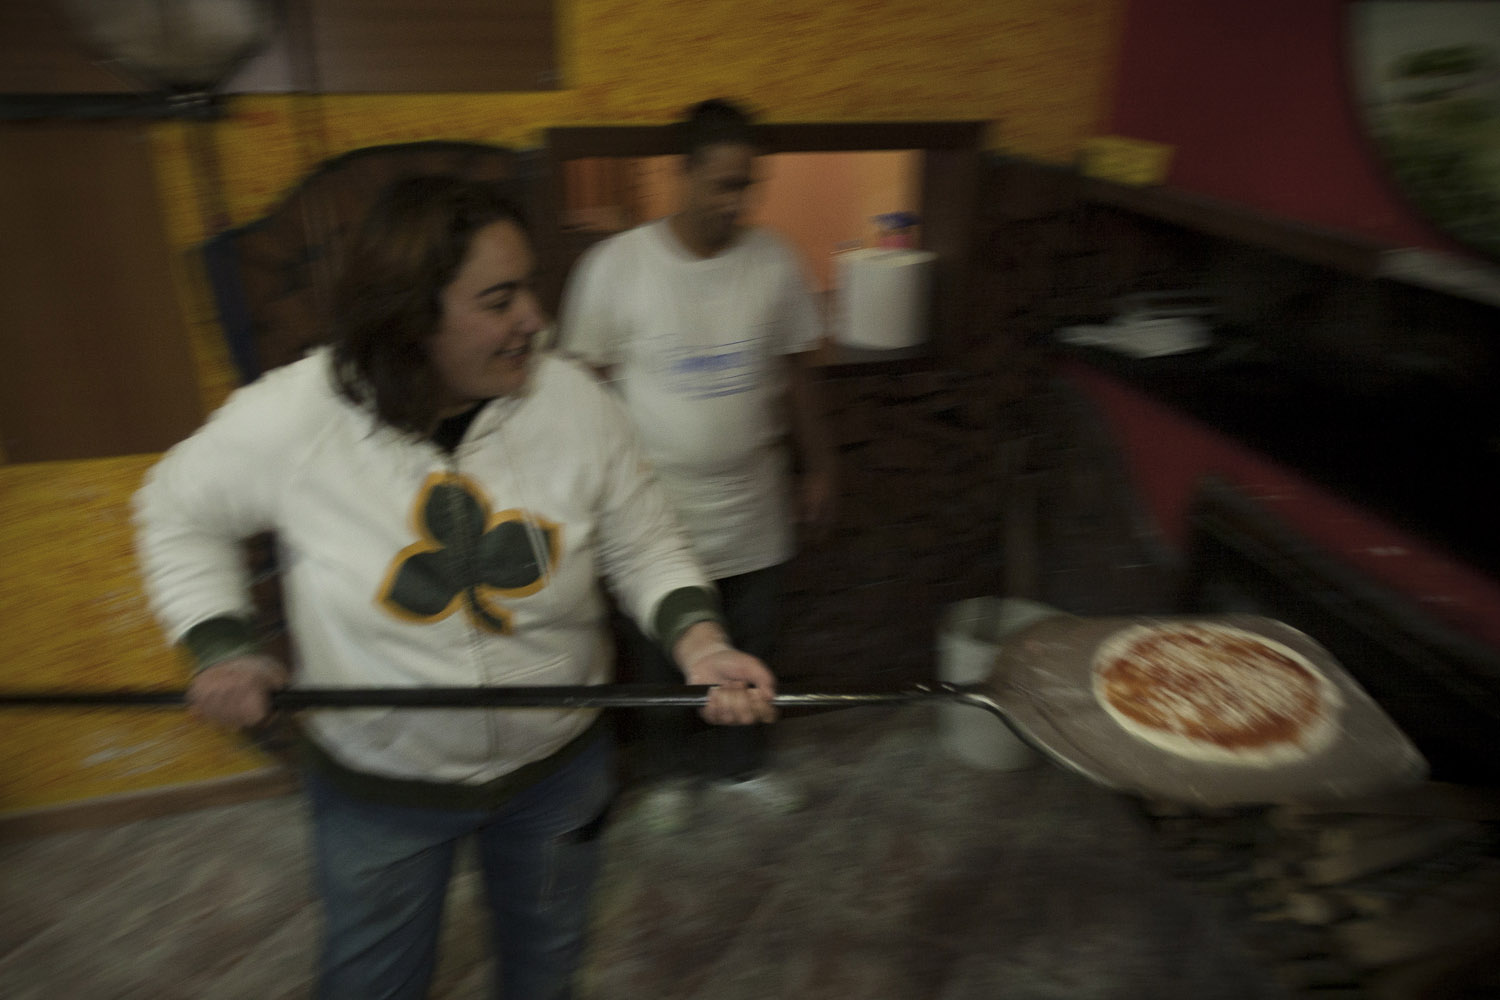 Pina makes her first pizza at the pizzeria near the “roundabout”, which had became one of the main hangout spots of the protester. As the mobilisation died out and the garbage issue slipped back into oblivion, the roadblocks ceased and were eventually physically dismantled by police forces in mid-December, with almost no opposition.